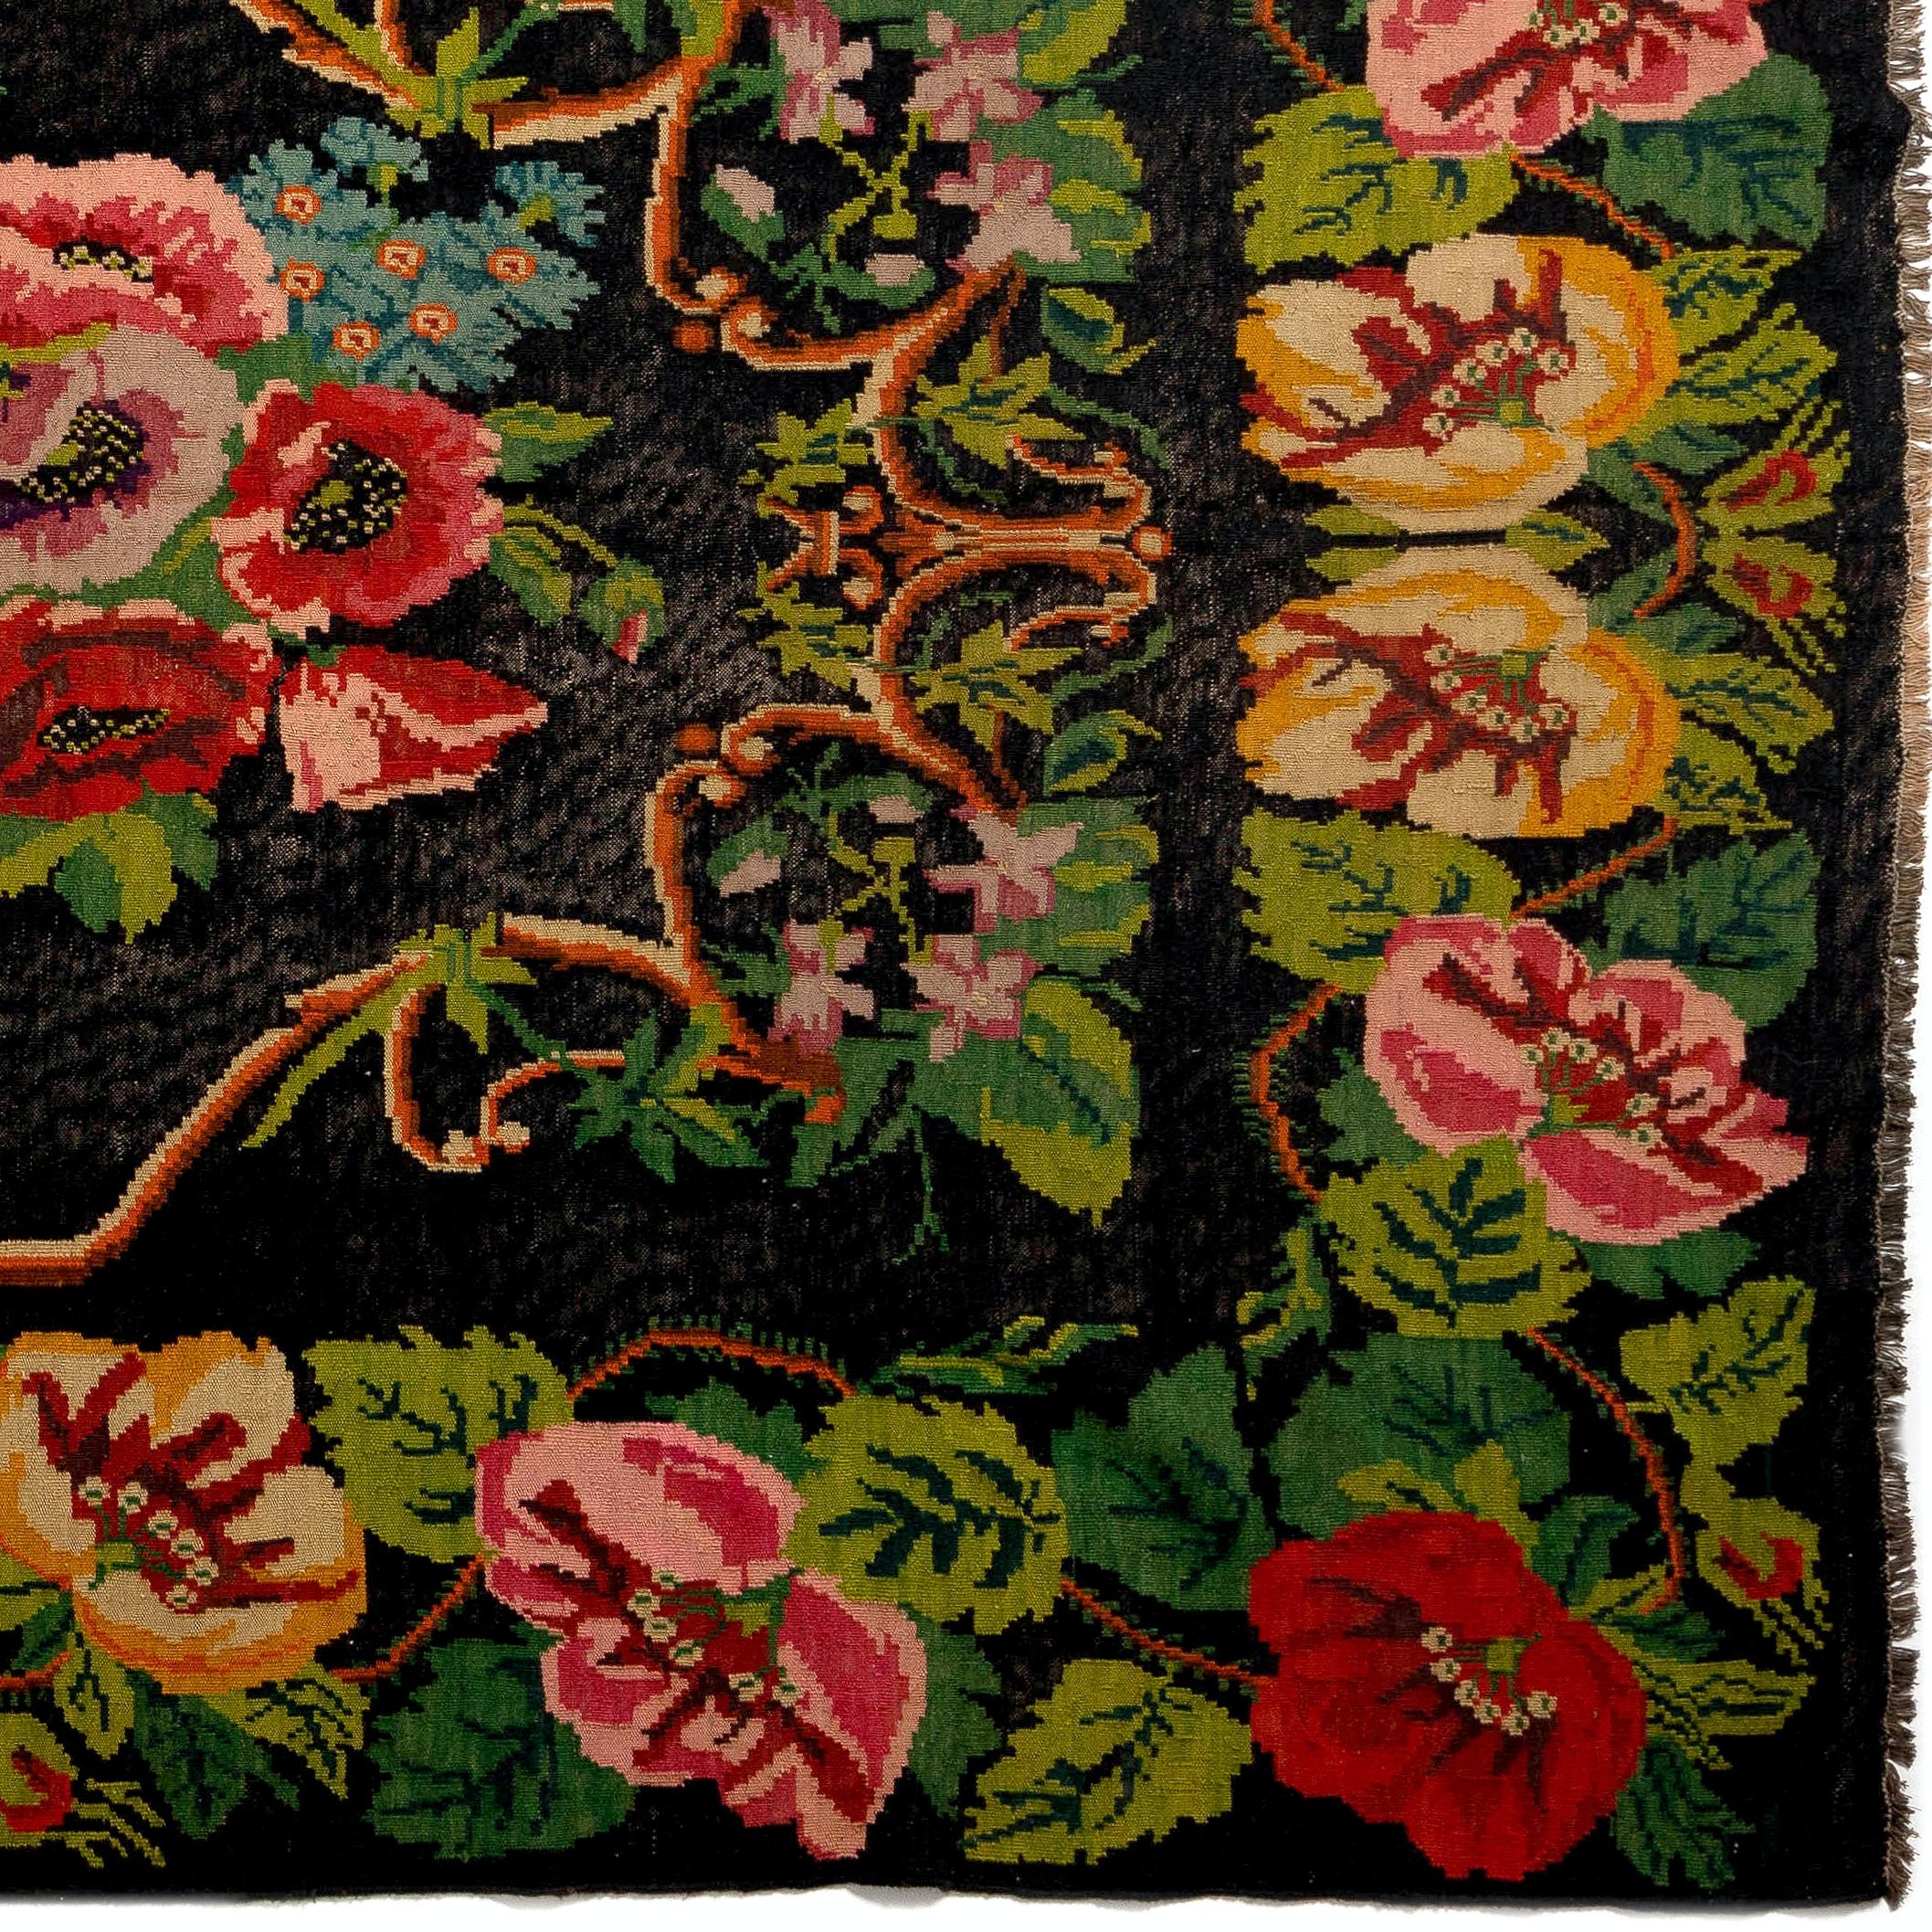 Hand-Woven 7.6x11.4 Ft Handmade Bessarabian Kilim. Vintage Floral Rug. All Wool Tapestry For Sale